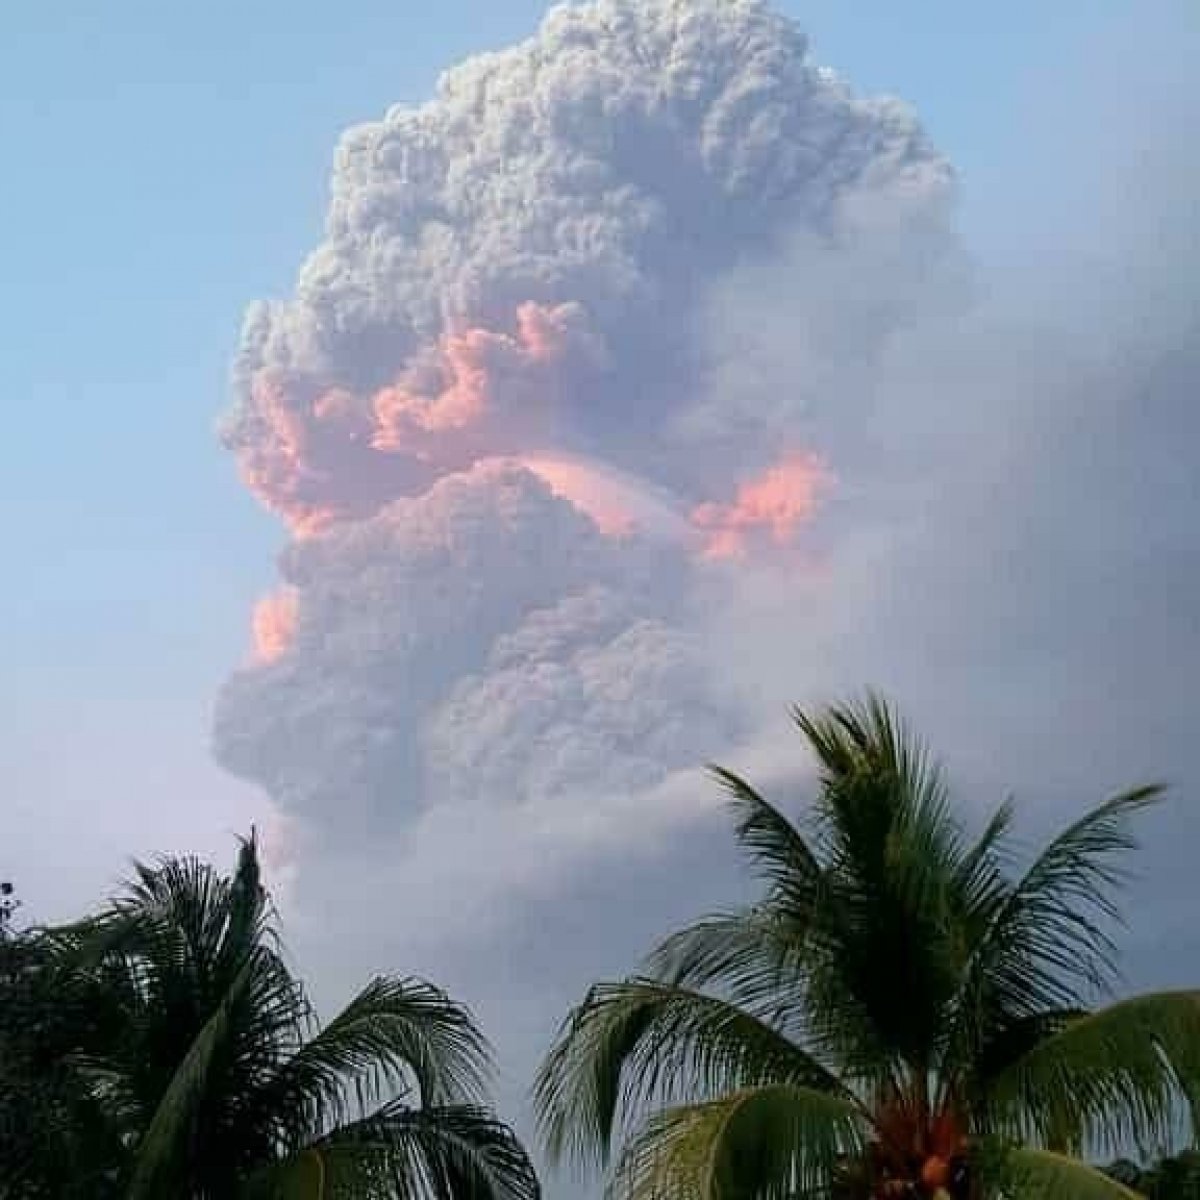 La Soufriere Volcano erupted 3 times in 2 days, it rained ash #4